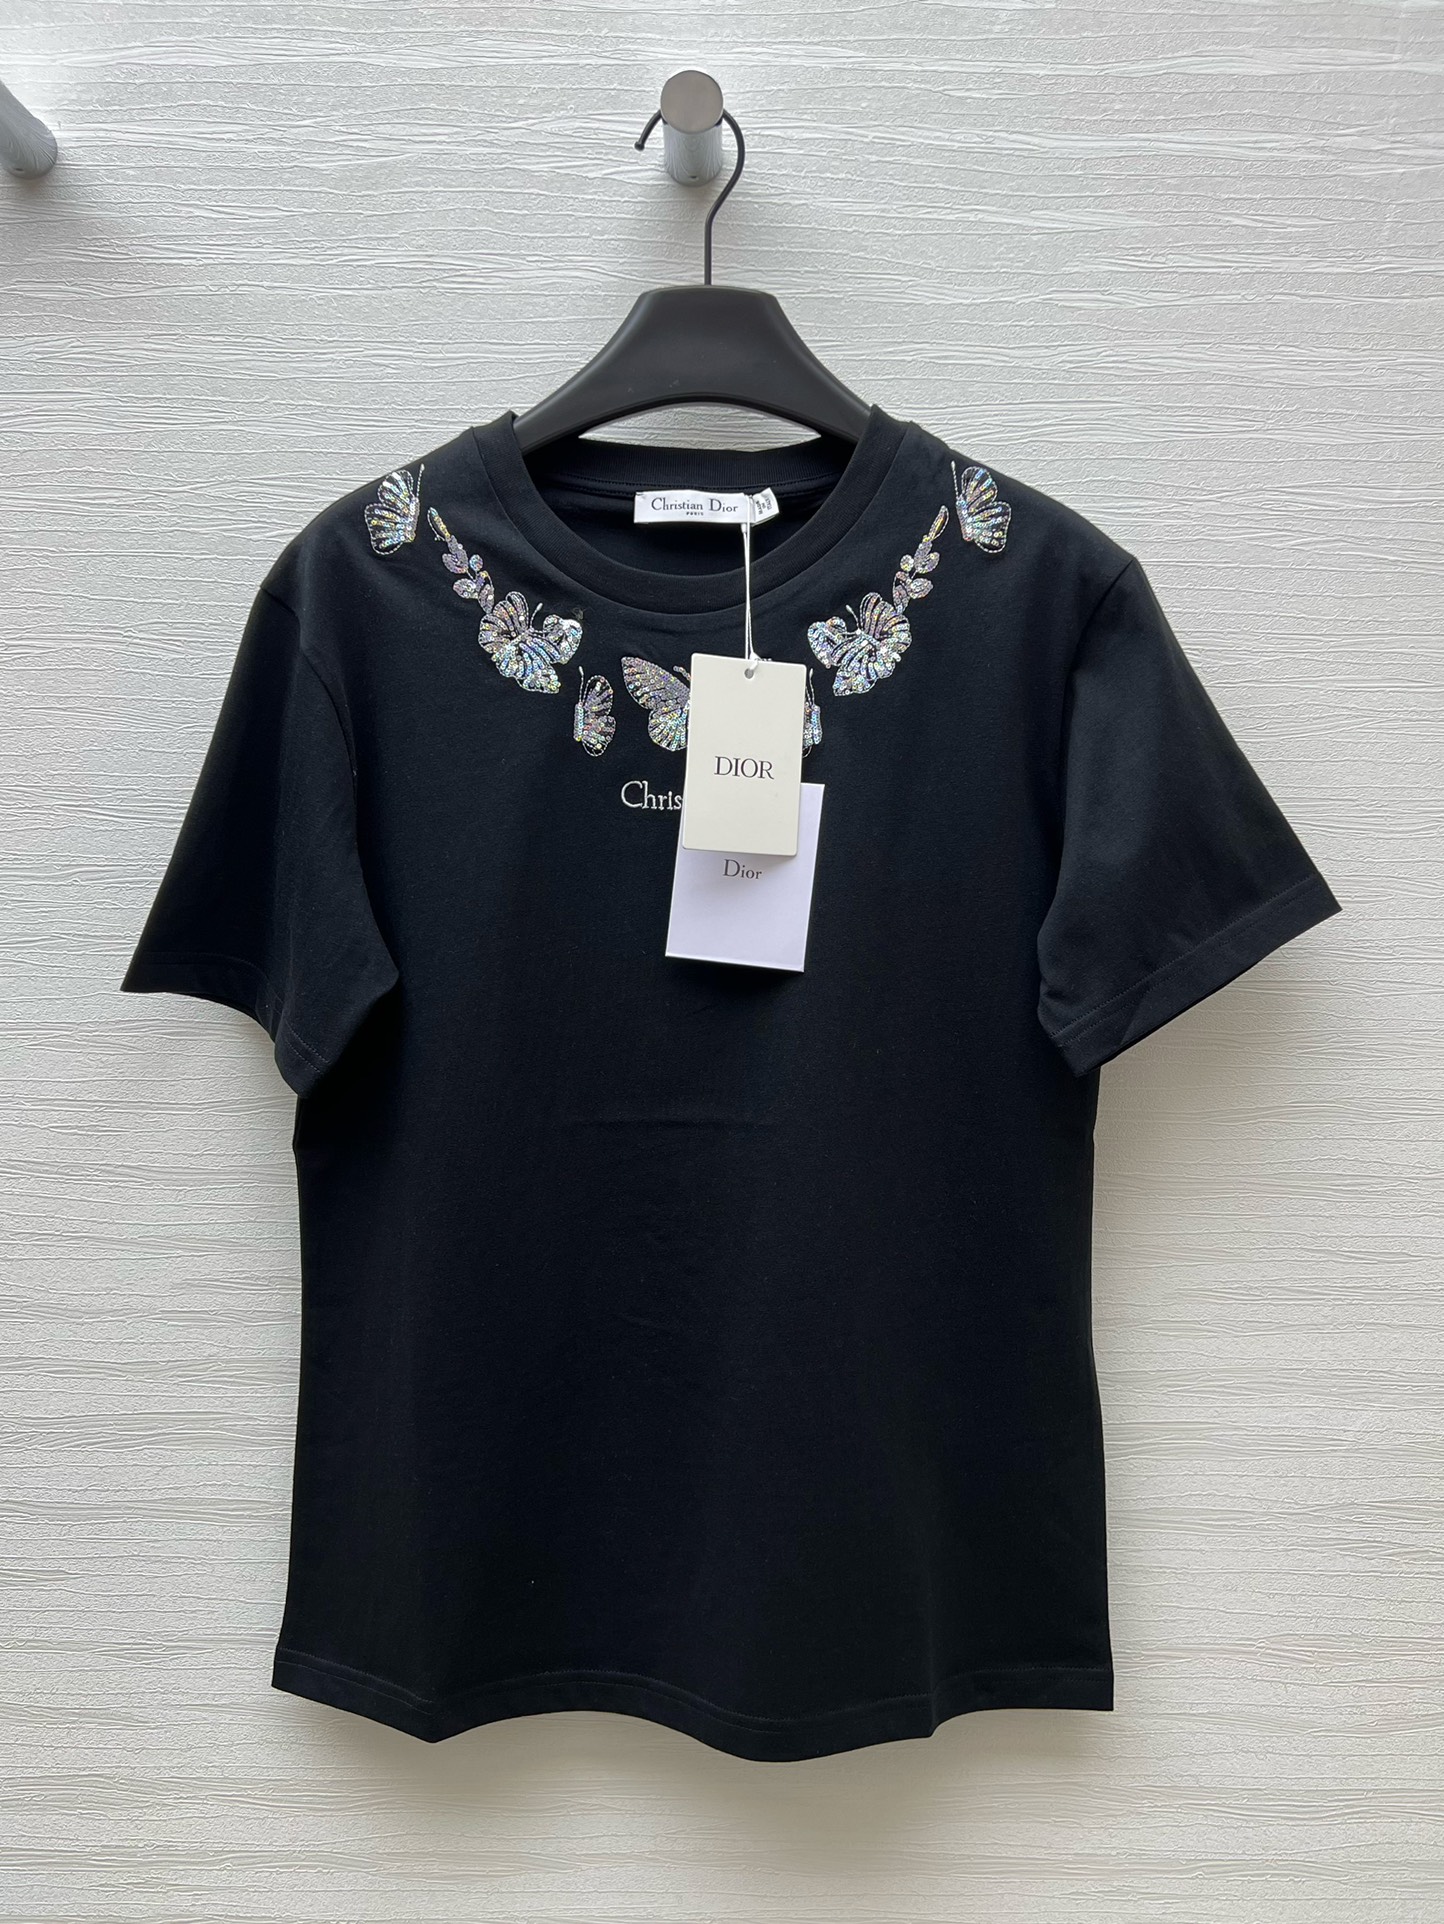 Dior Clothing T-Shirt Embroidery Spring/Summer Collection Short Sleeve